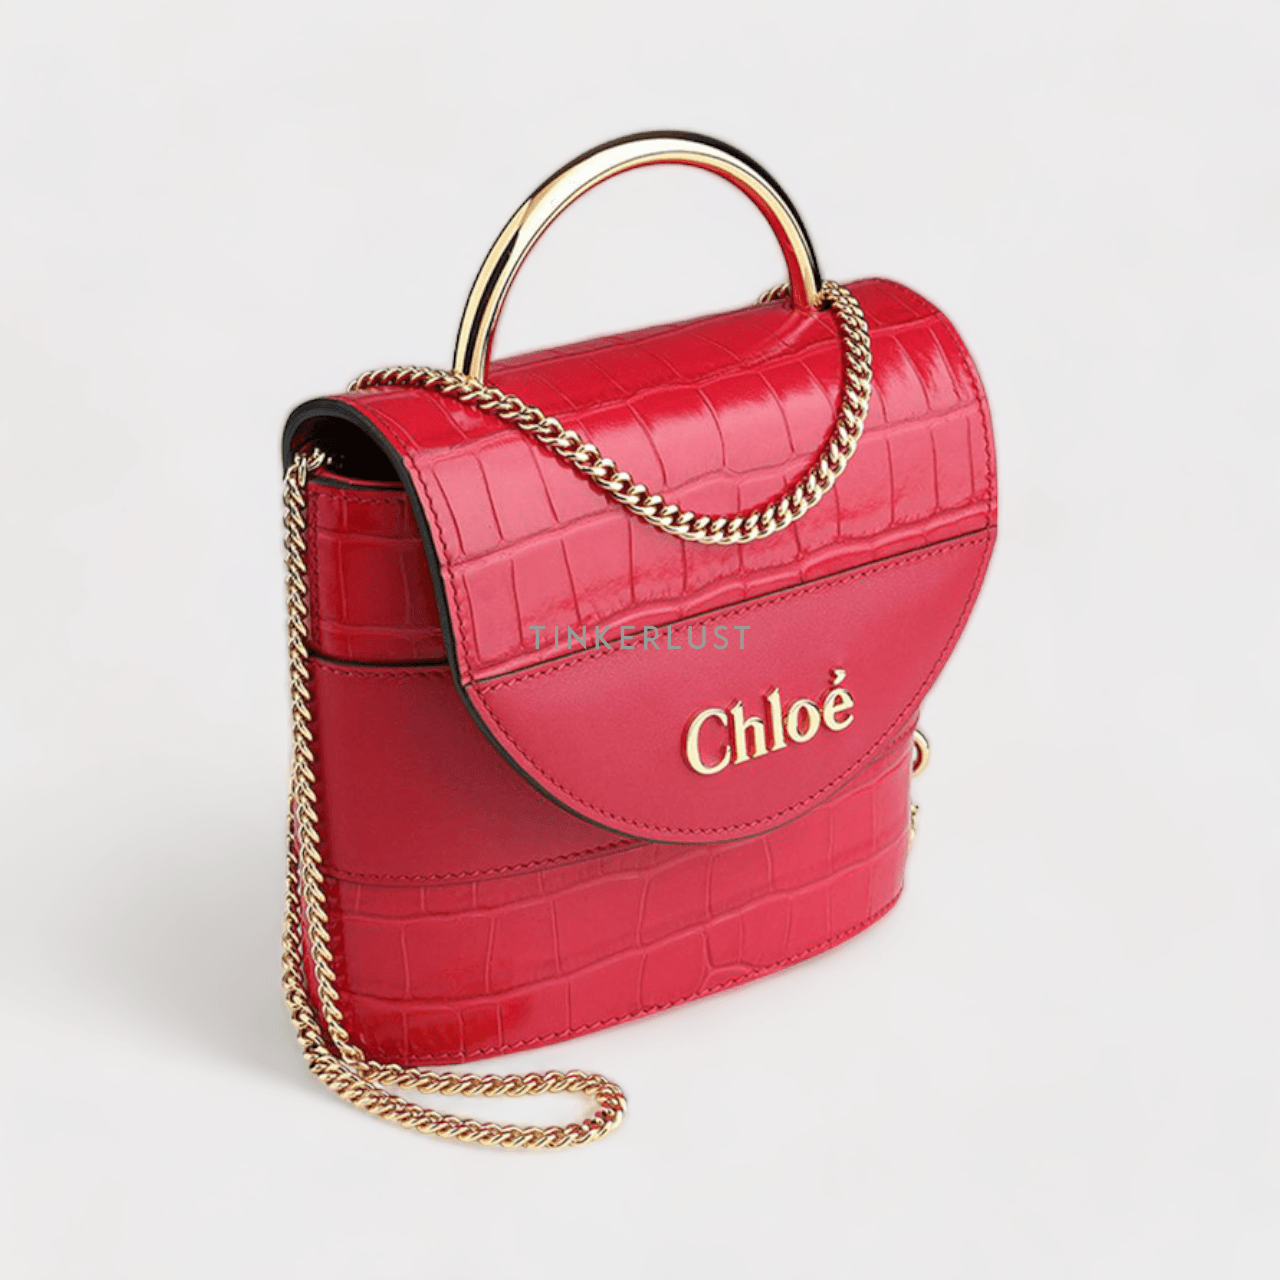 Chloe Small Abylock Top Handle Bag in Crimson Pink Croco Leather with Chain Strap Satchel